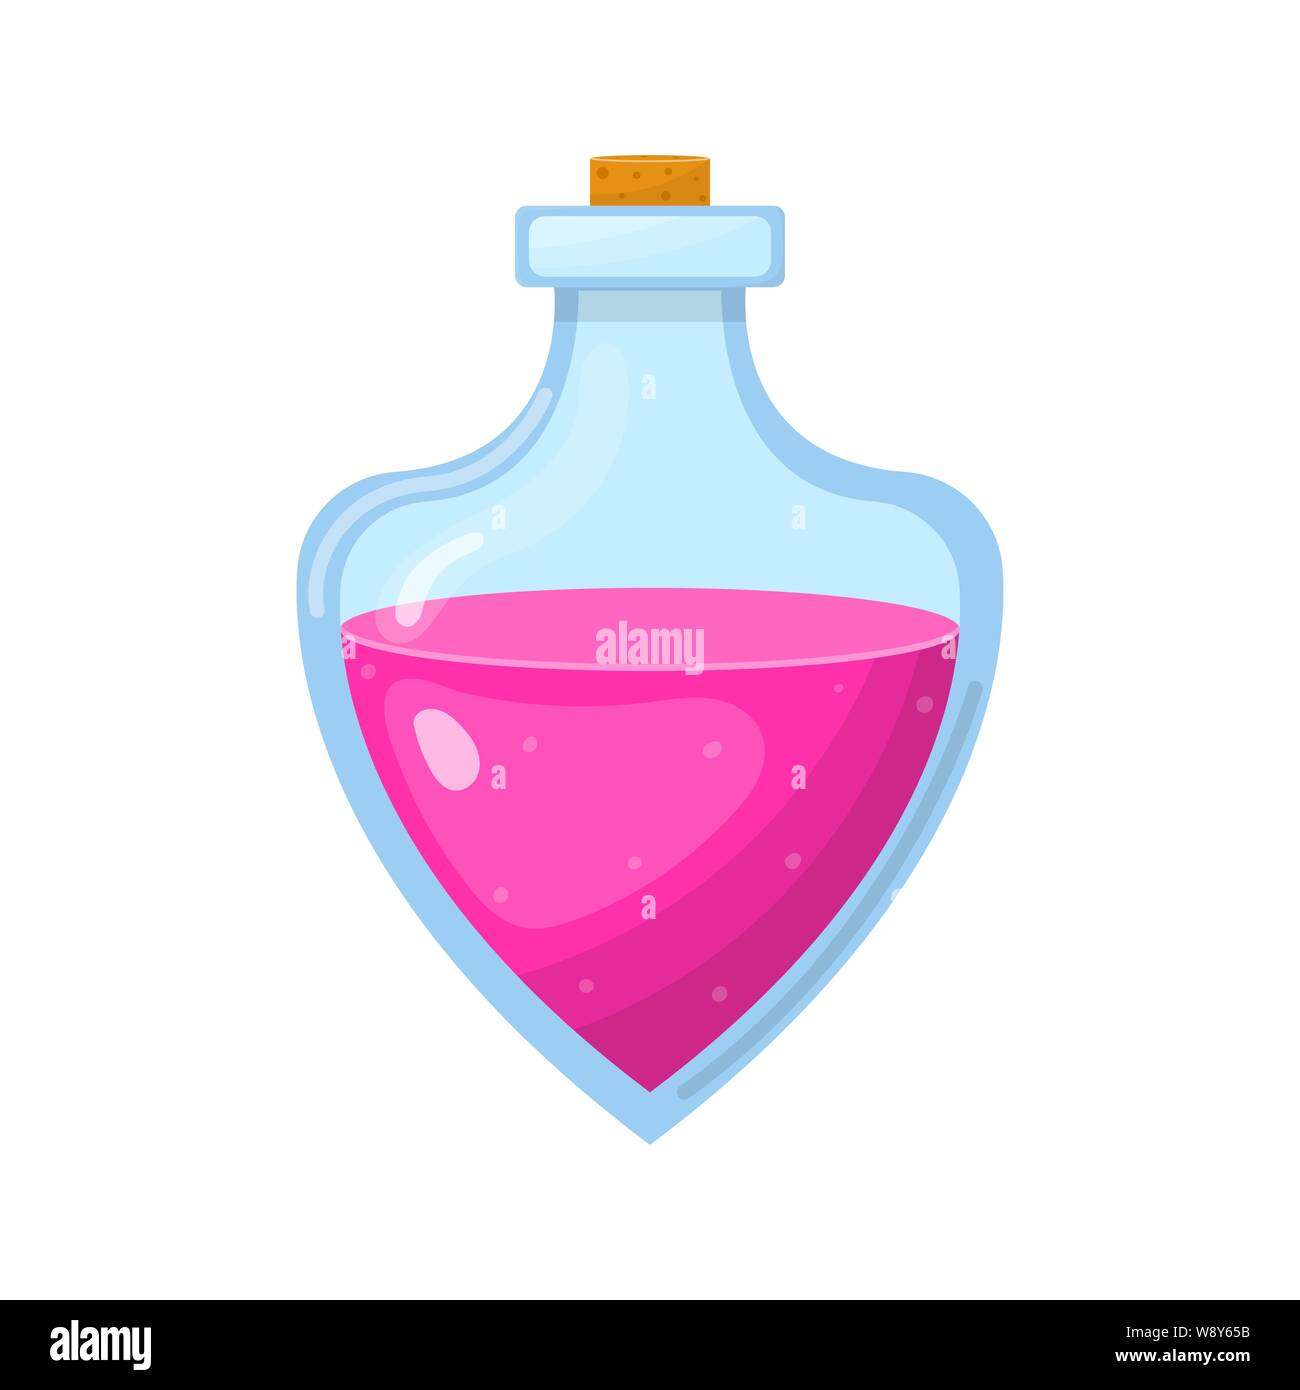 https://c8.alamy.com/comp/W8Y65B/magic-potion-in-bottle-with-pink-liquid-isolated-on-white-background-cartoon-fairy-elixir-vector-illustration-for-any-design-W8Y65B.jpg